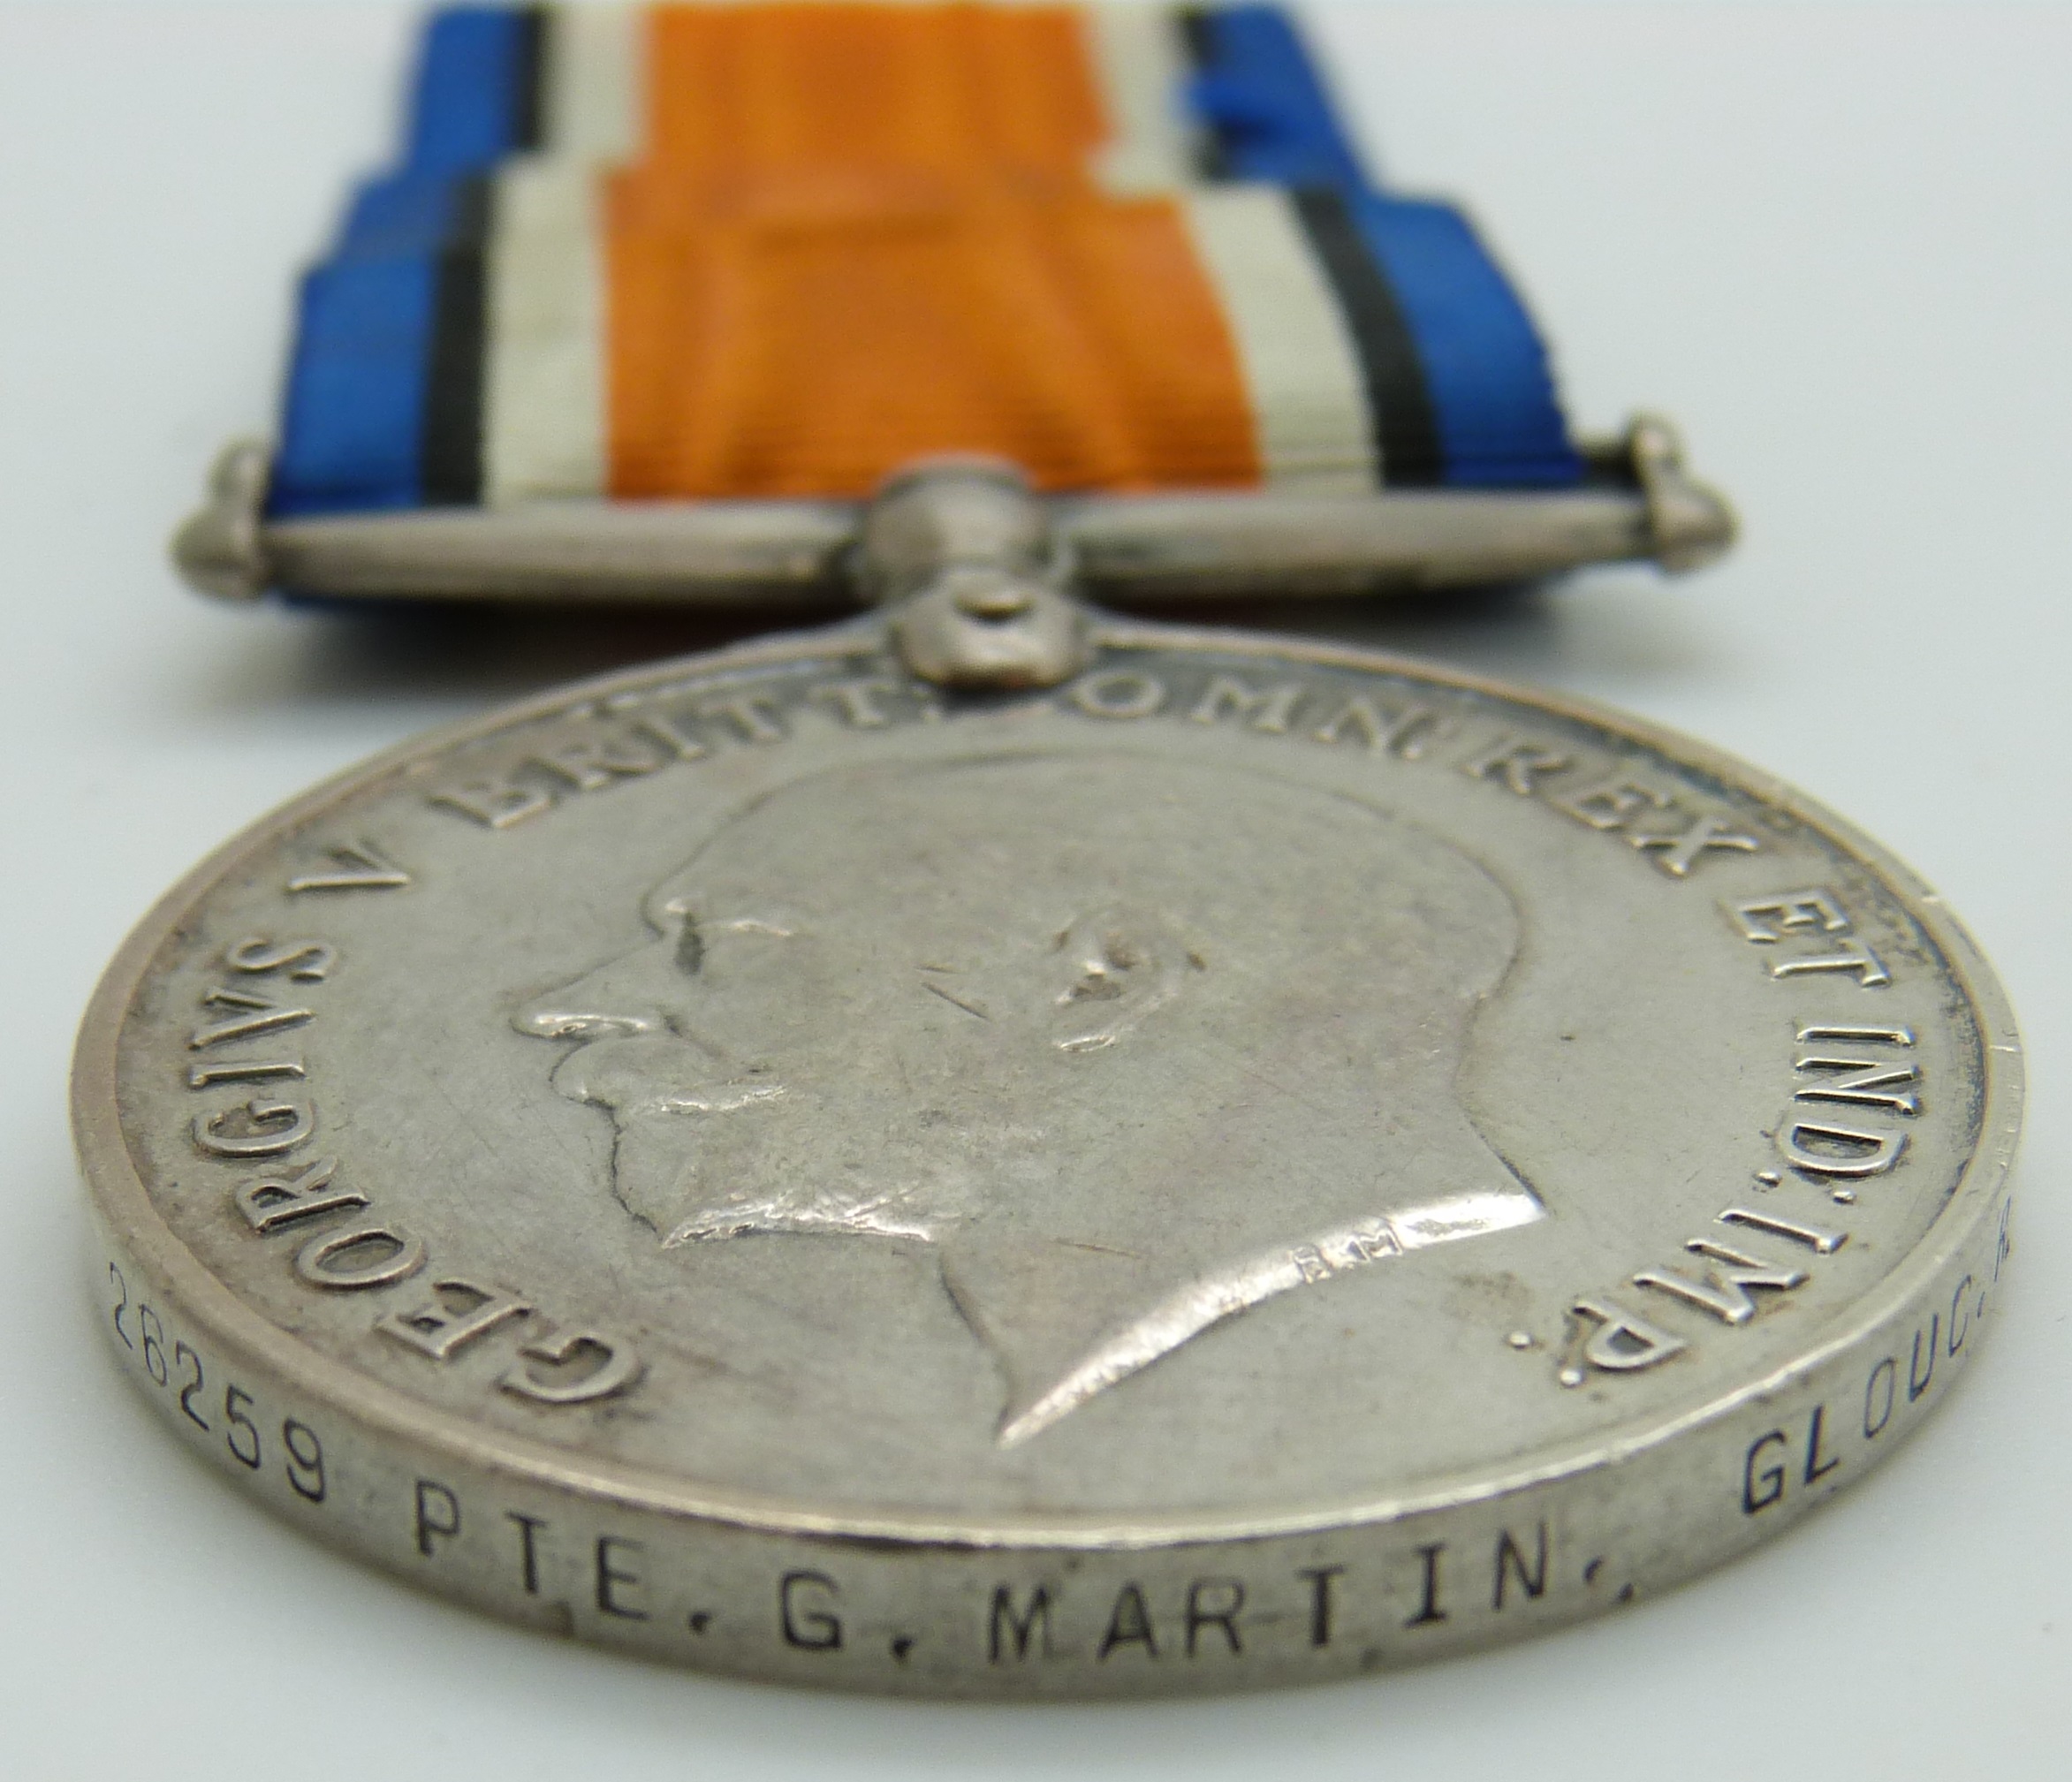 British Army WWI medals comprising War Medal and Victory Medal named to 26259 Pte G Martin, - Image 3 of 3